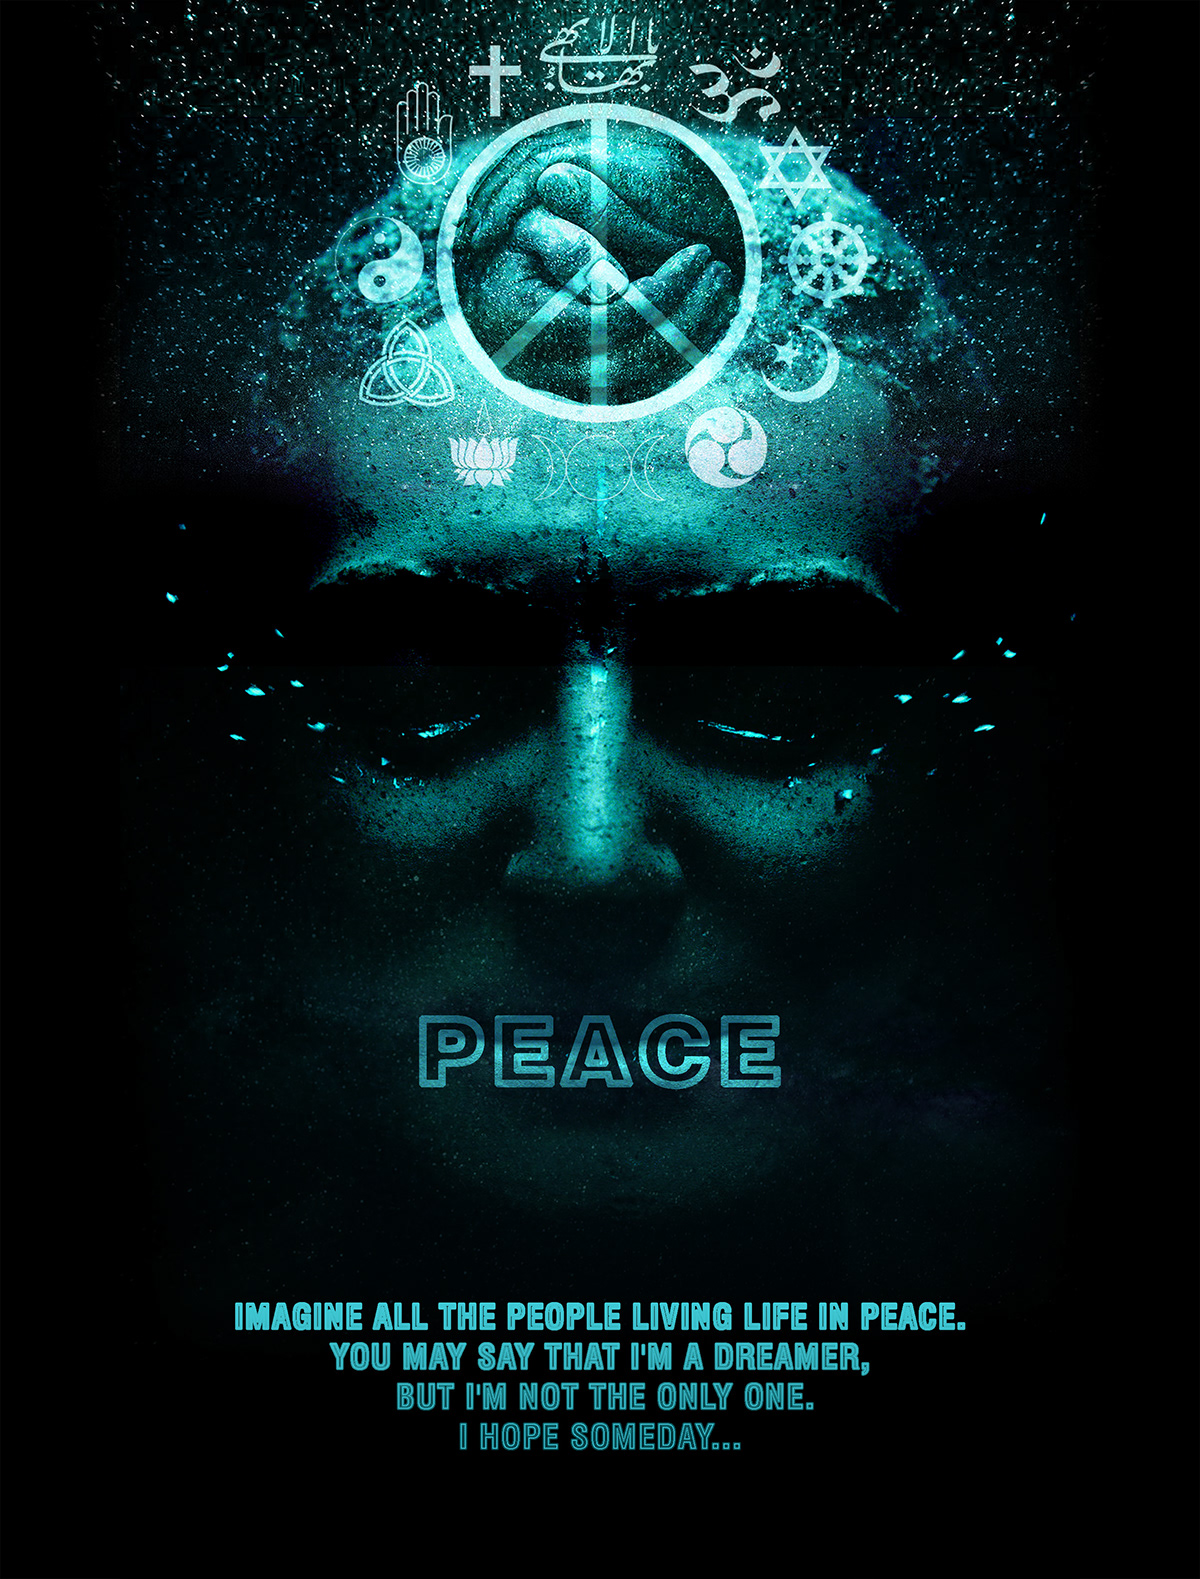 Concept art graphics describes the dilemma of an individual and his own struggle to achieve peace.